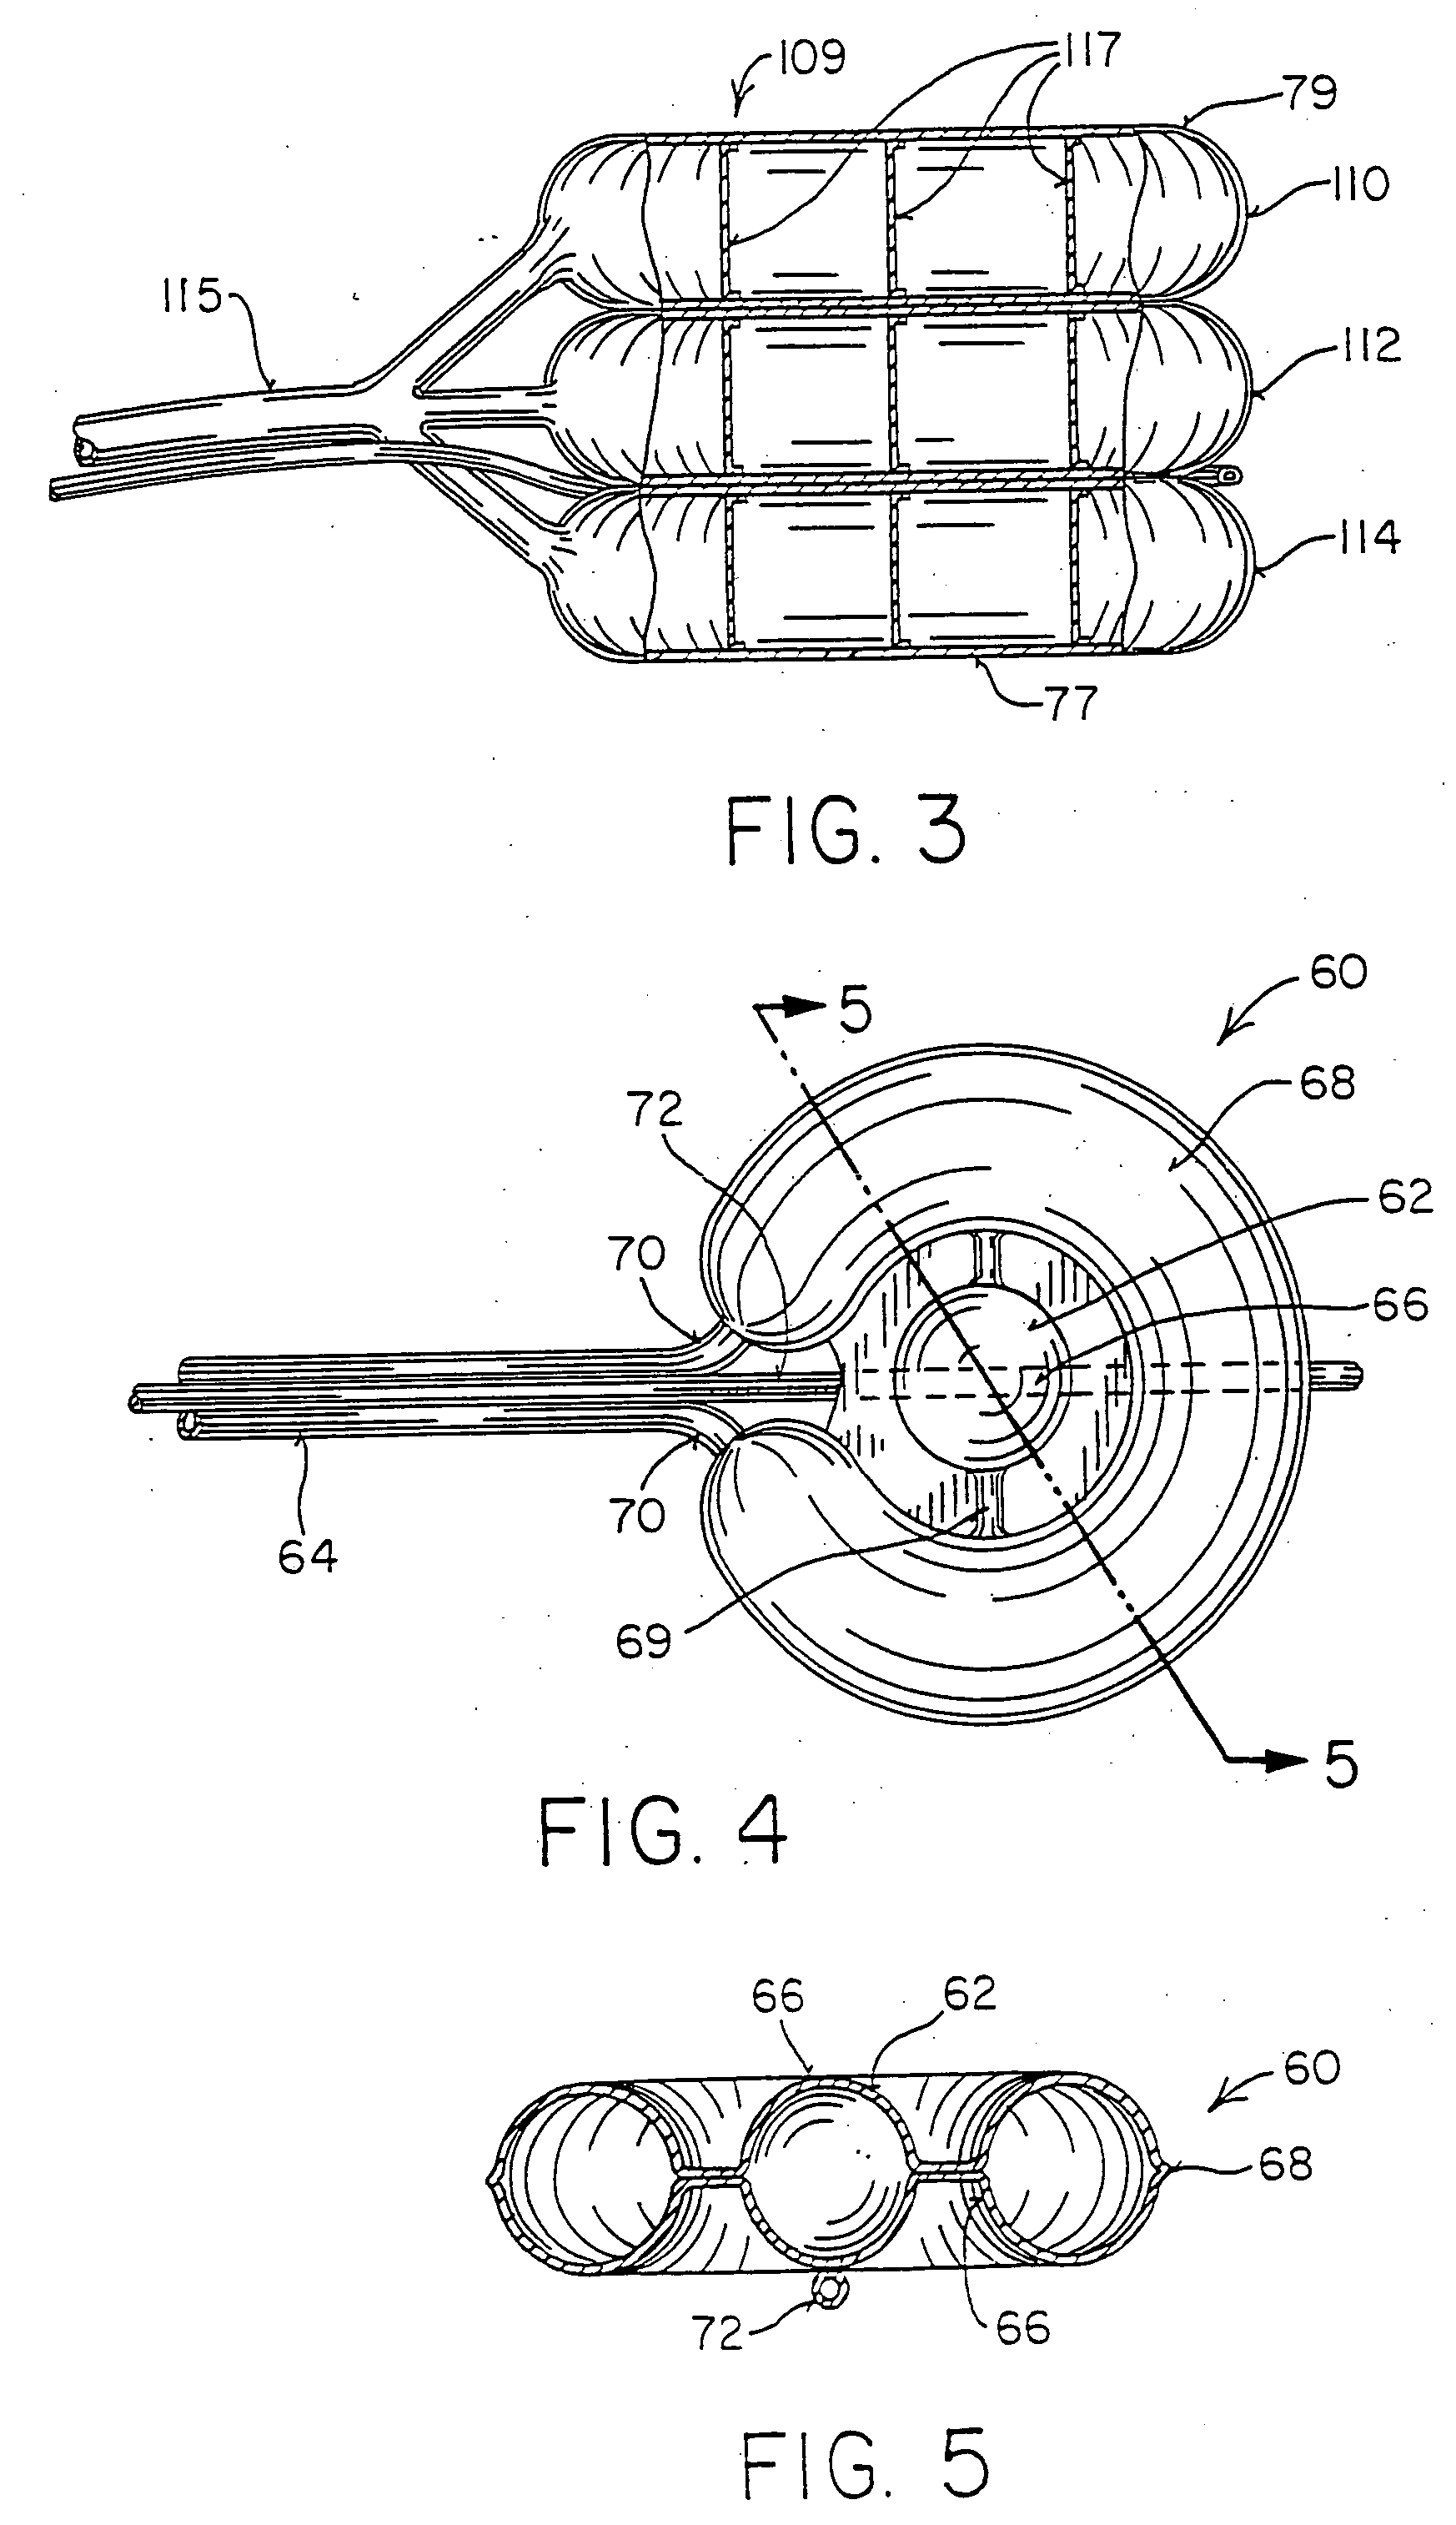 Inflatable device for use in surgical protocol relating to fixation of bone